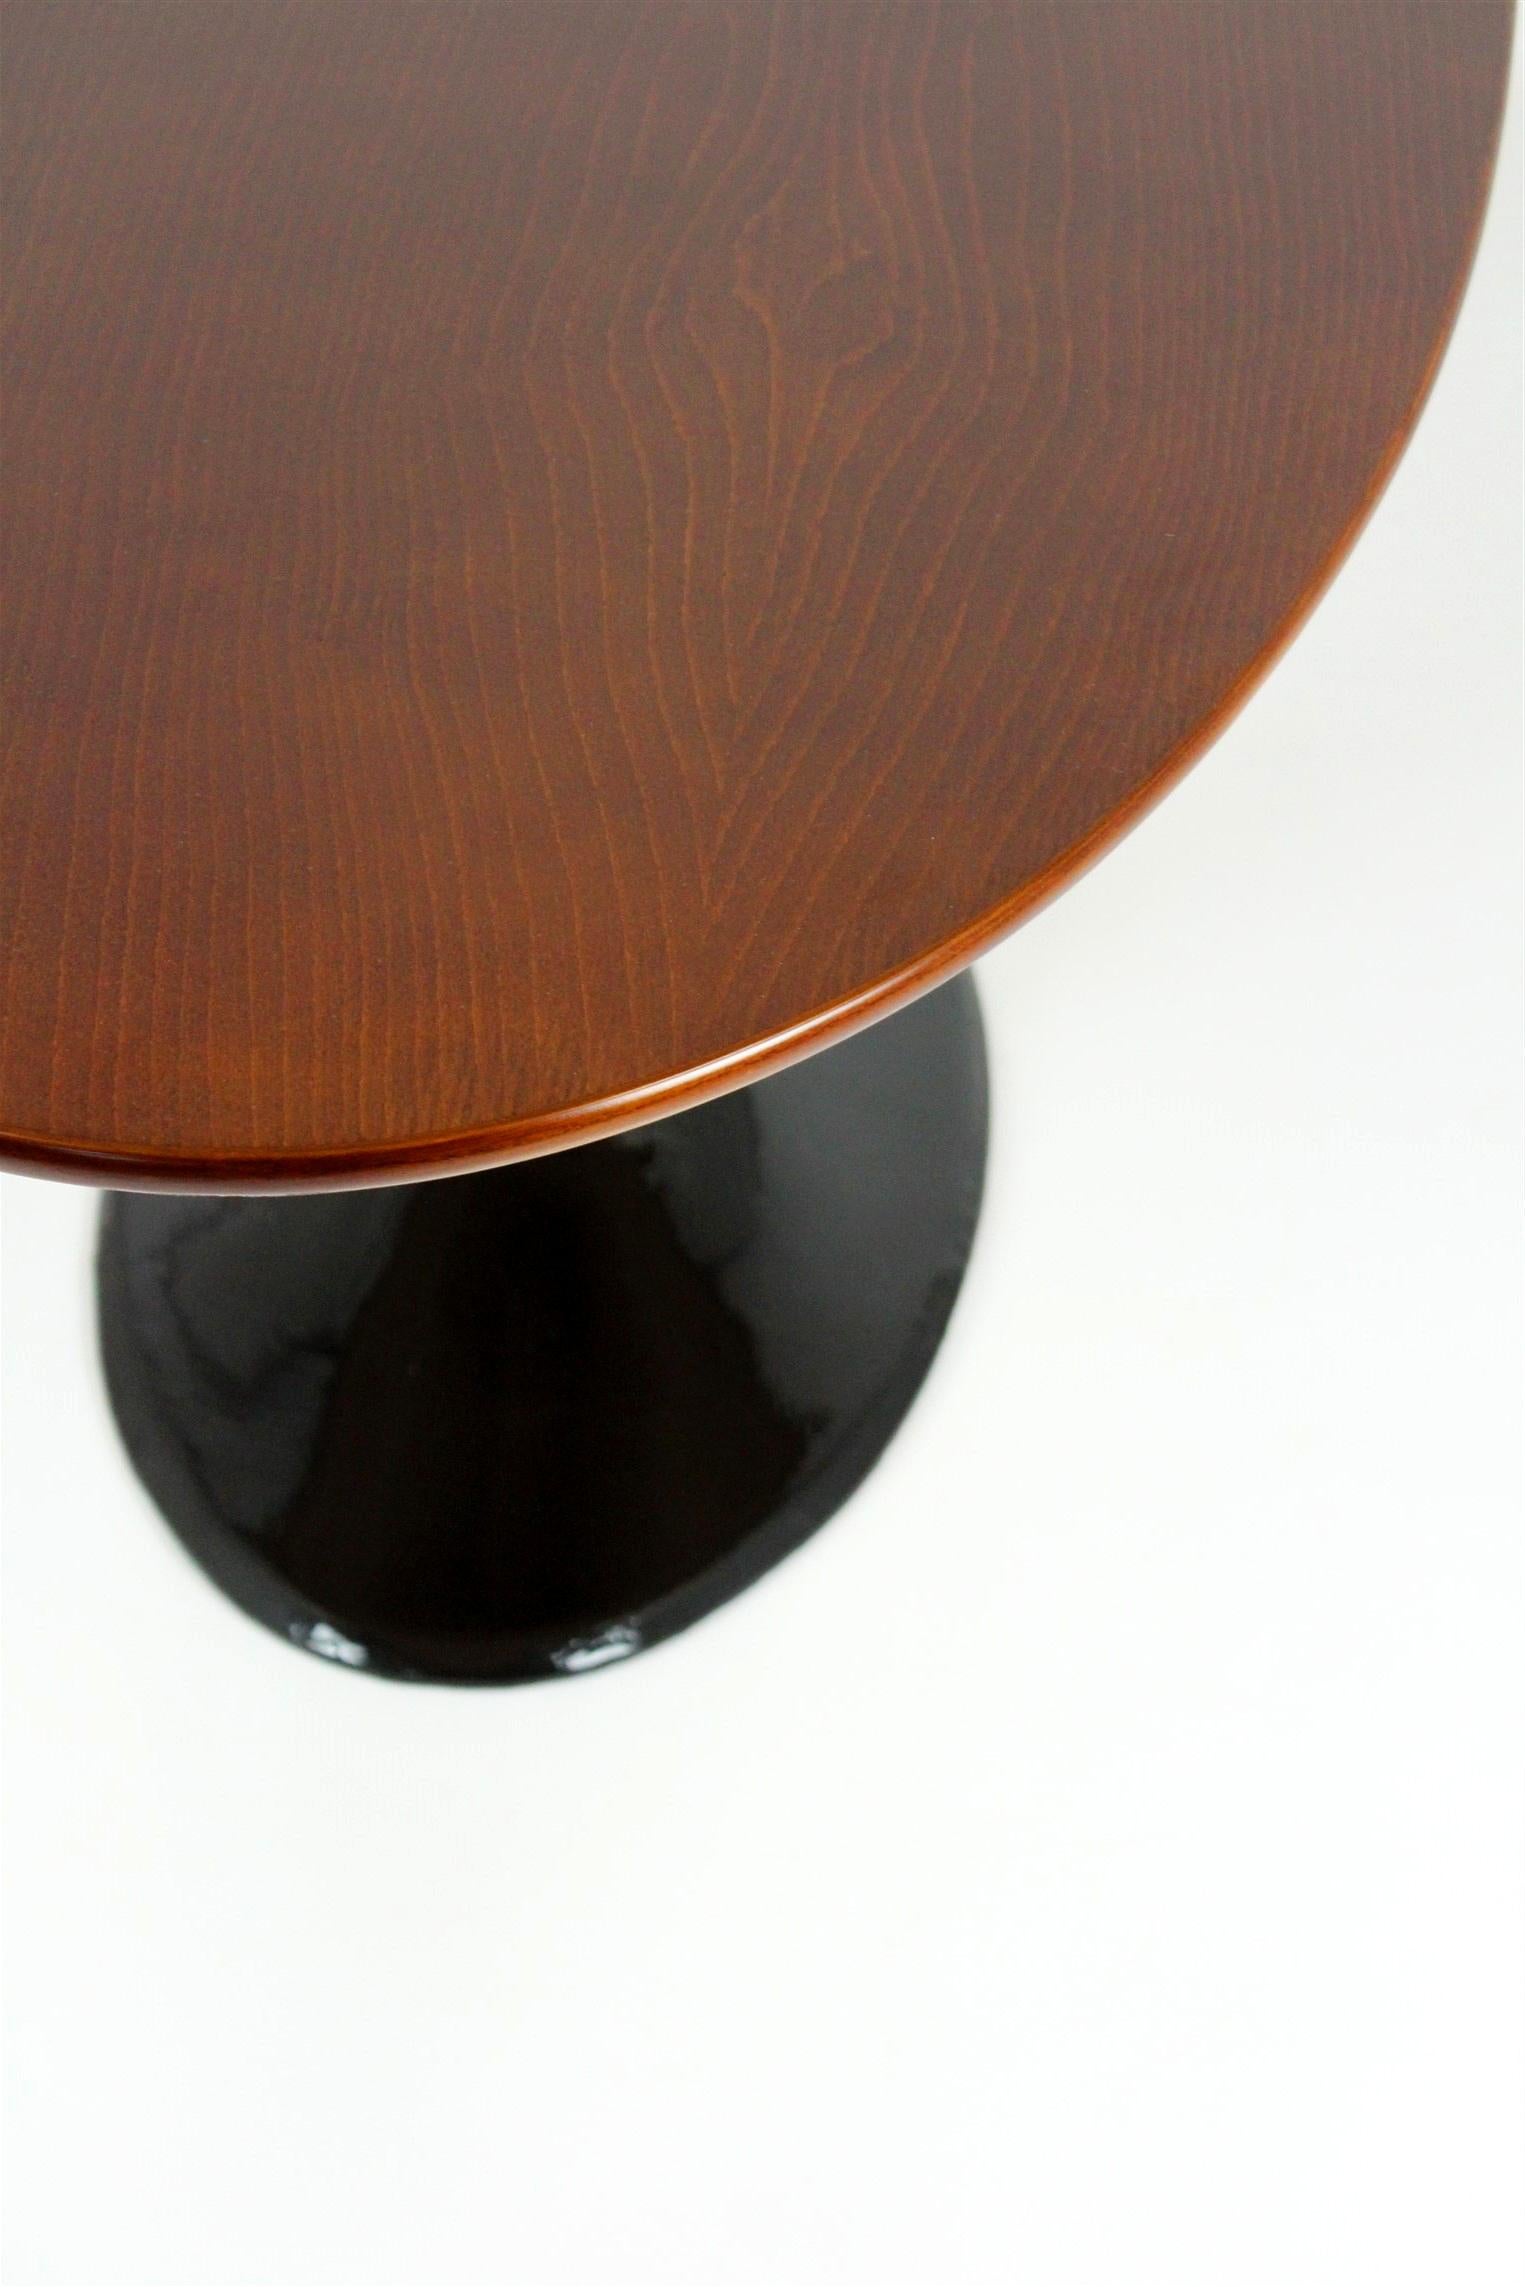 Restored Mid-Century Modern Oval Ash Coffee Table from Drevotvar, 1960s For Sale 9